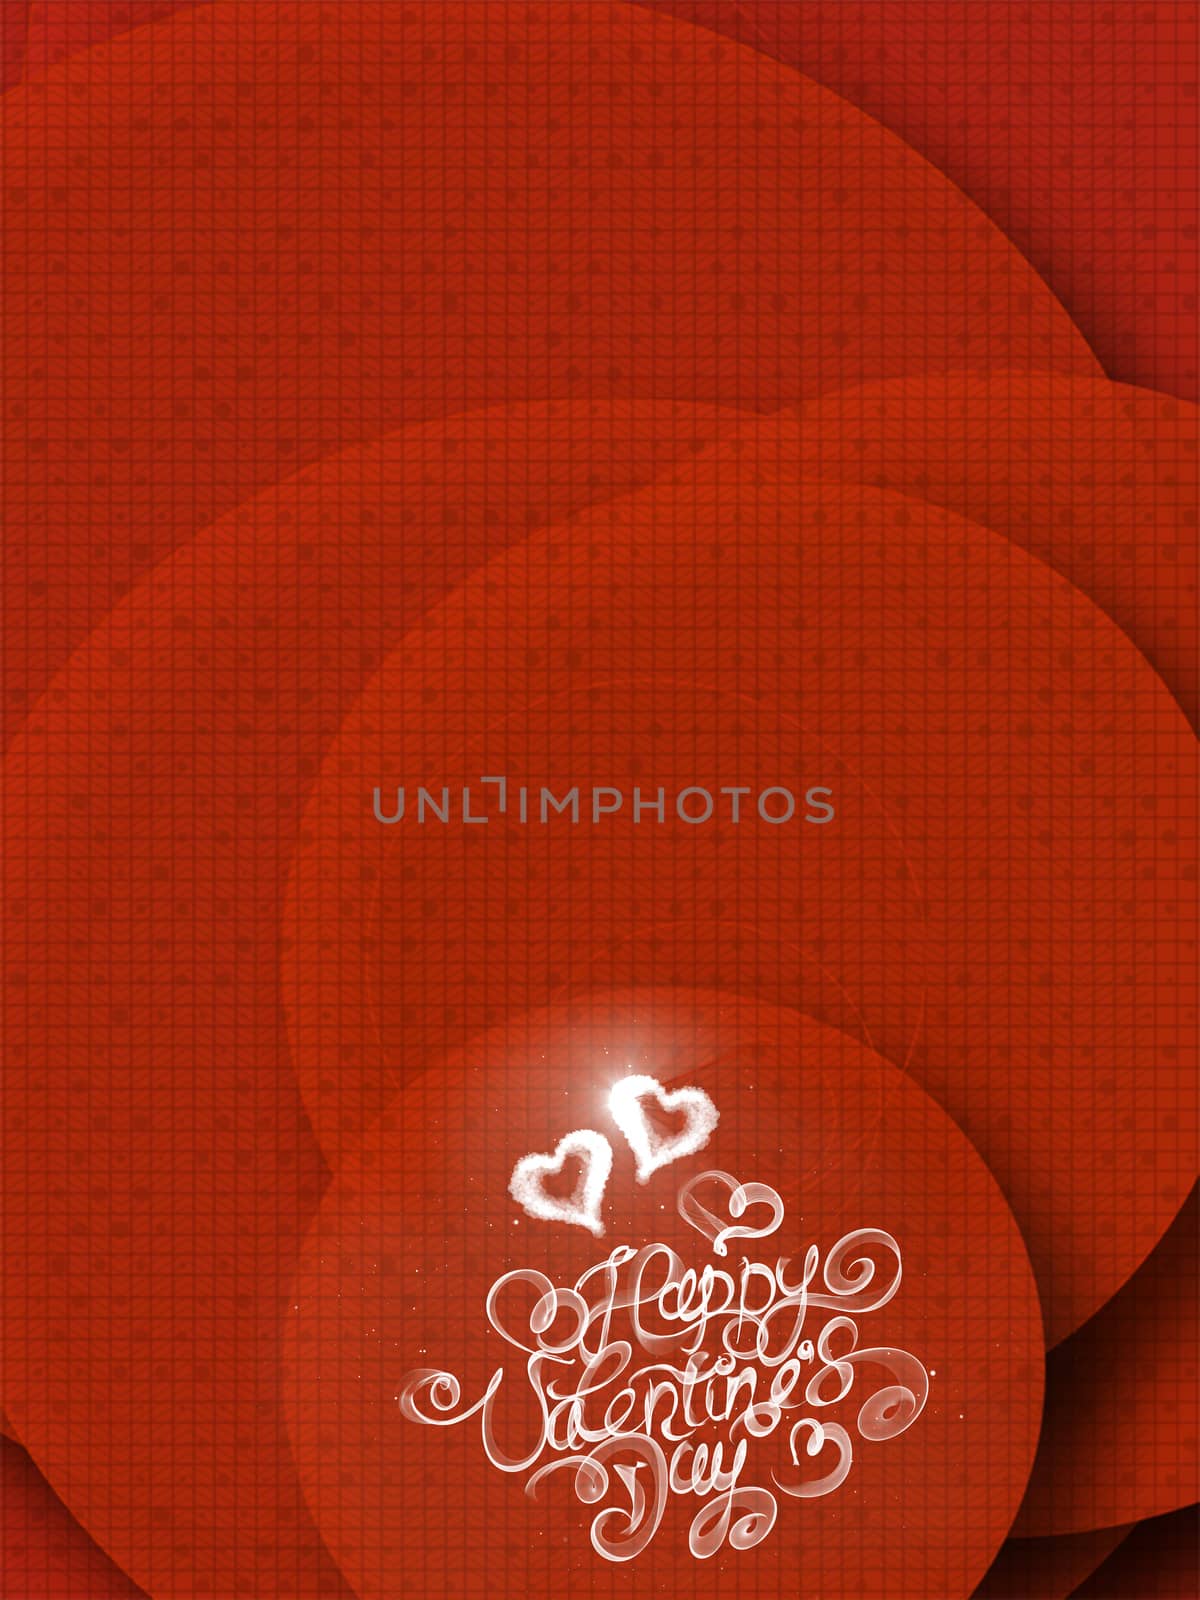 Happy Valentines day vintage lettering written by fire or smoke over red abstract background full of circles by skrotov